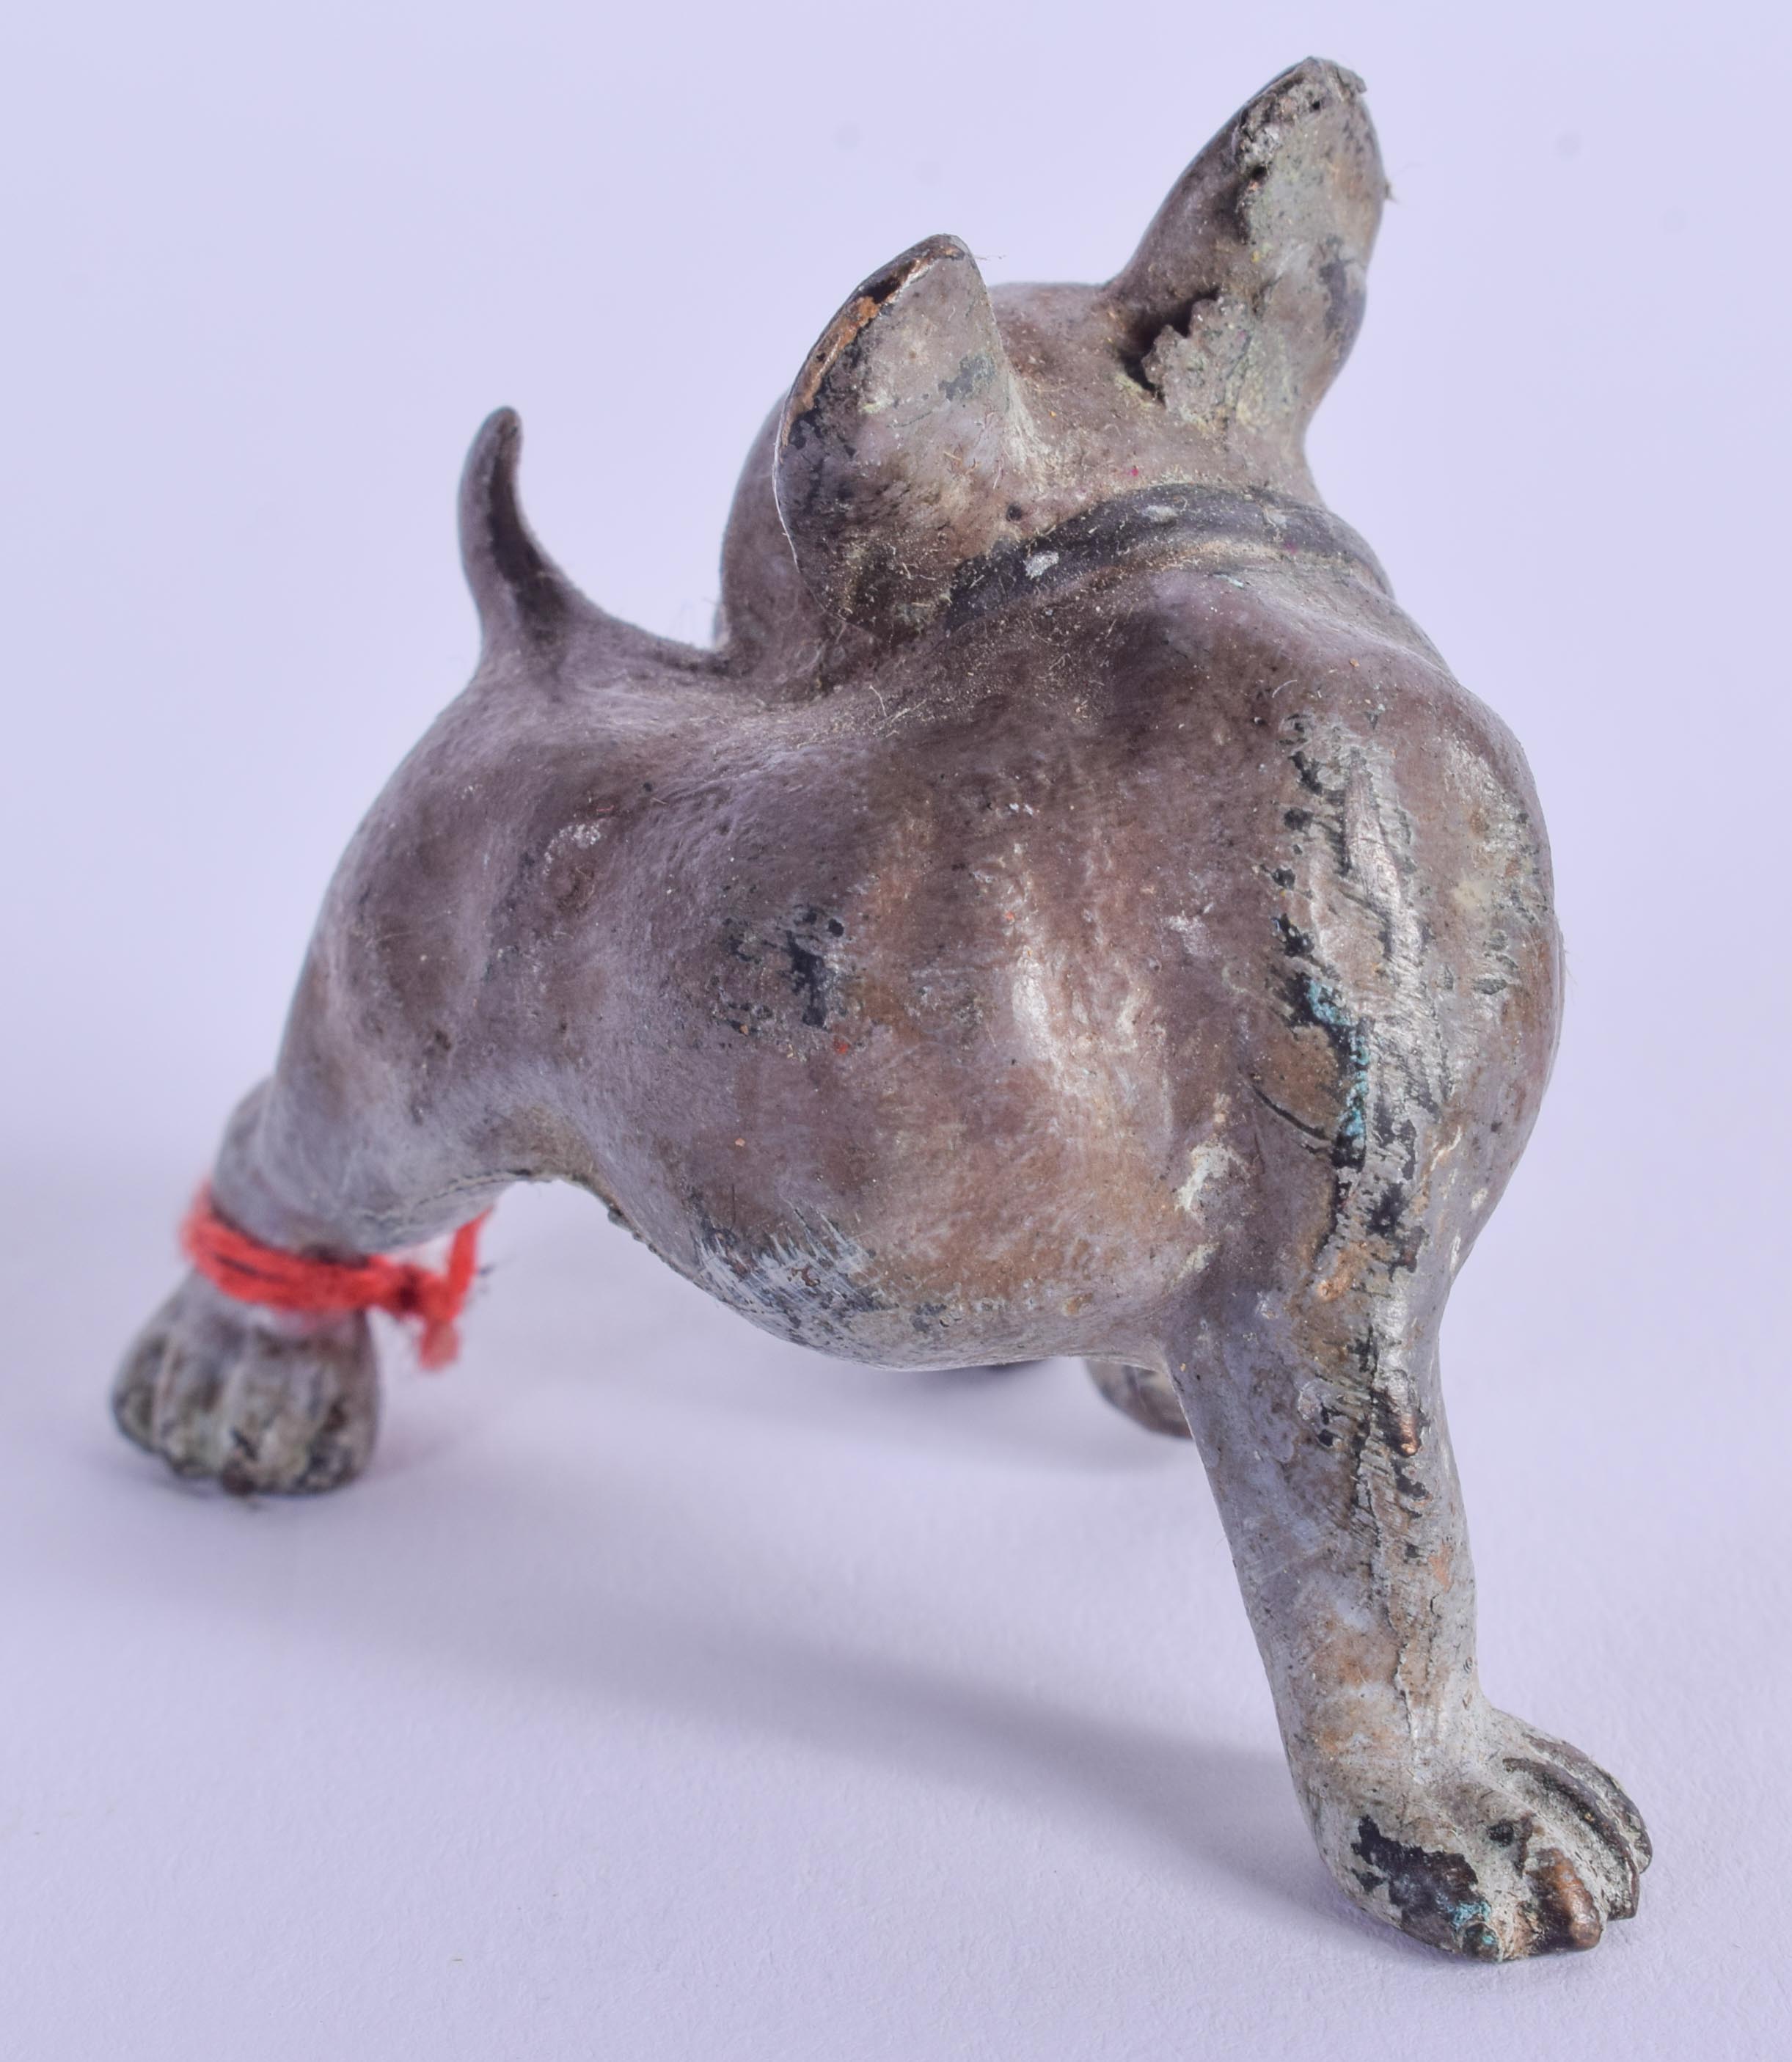 A COLD PAINTED BRONZE DOG. 4 cm x 4 cm. - Image 2 of 4